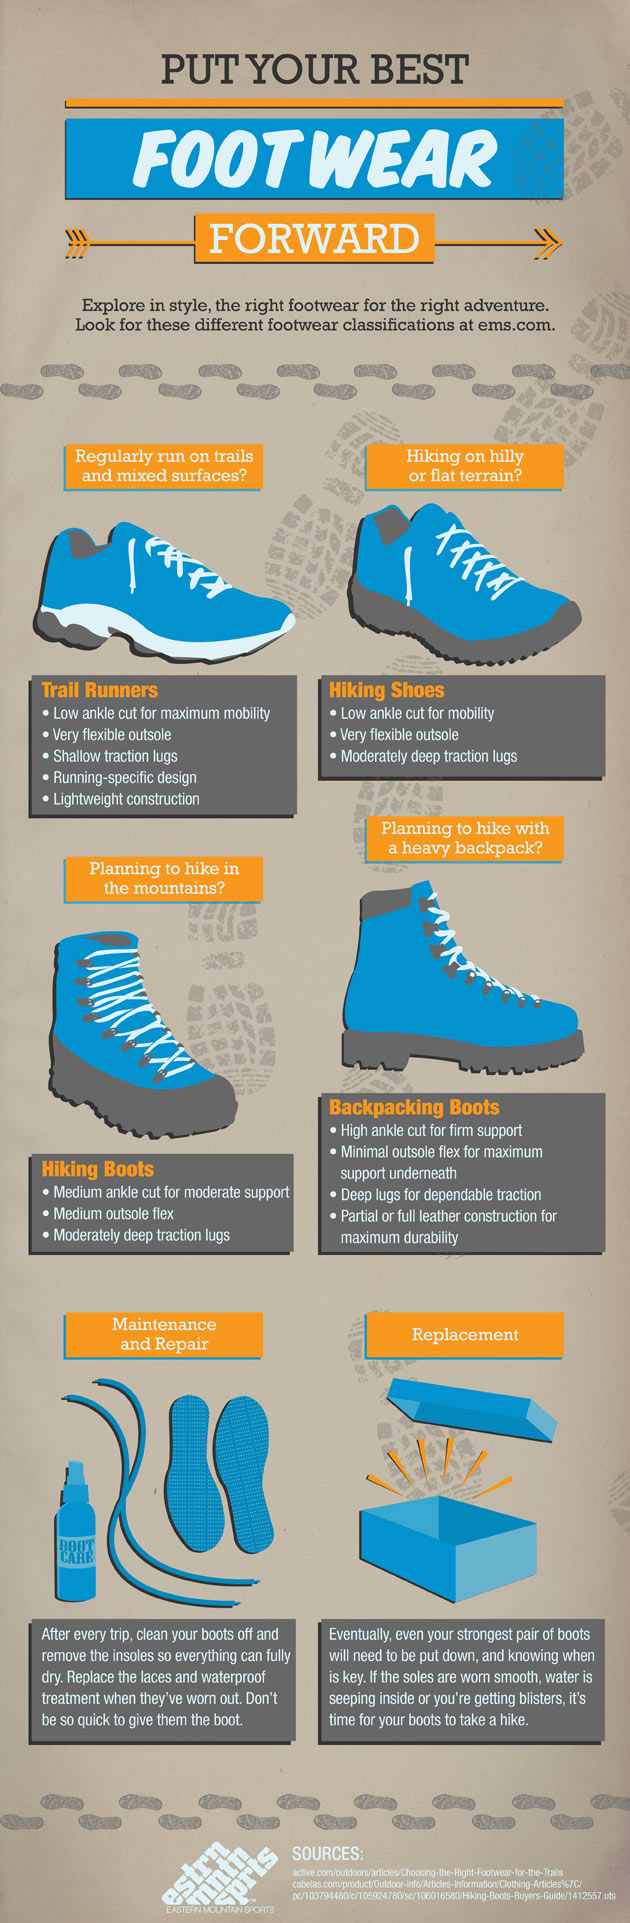 Finding the Right Footwear Style | Eastern Mountain Sports